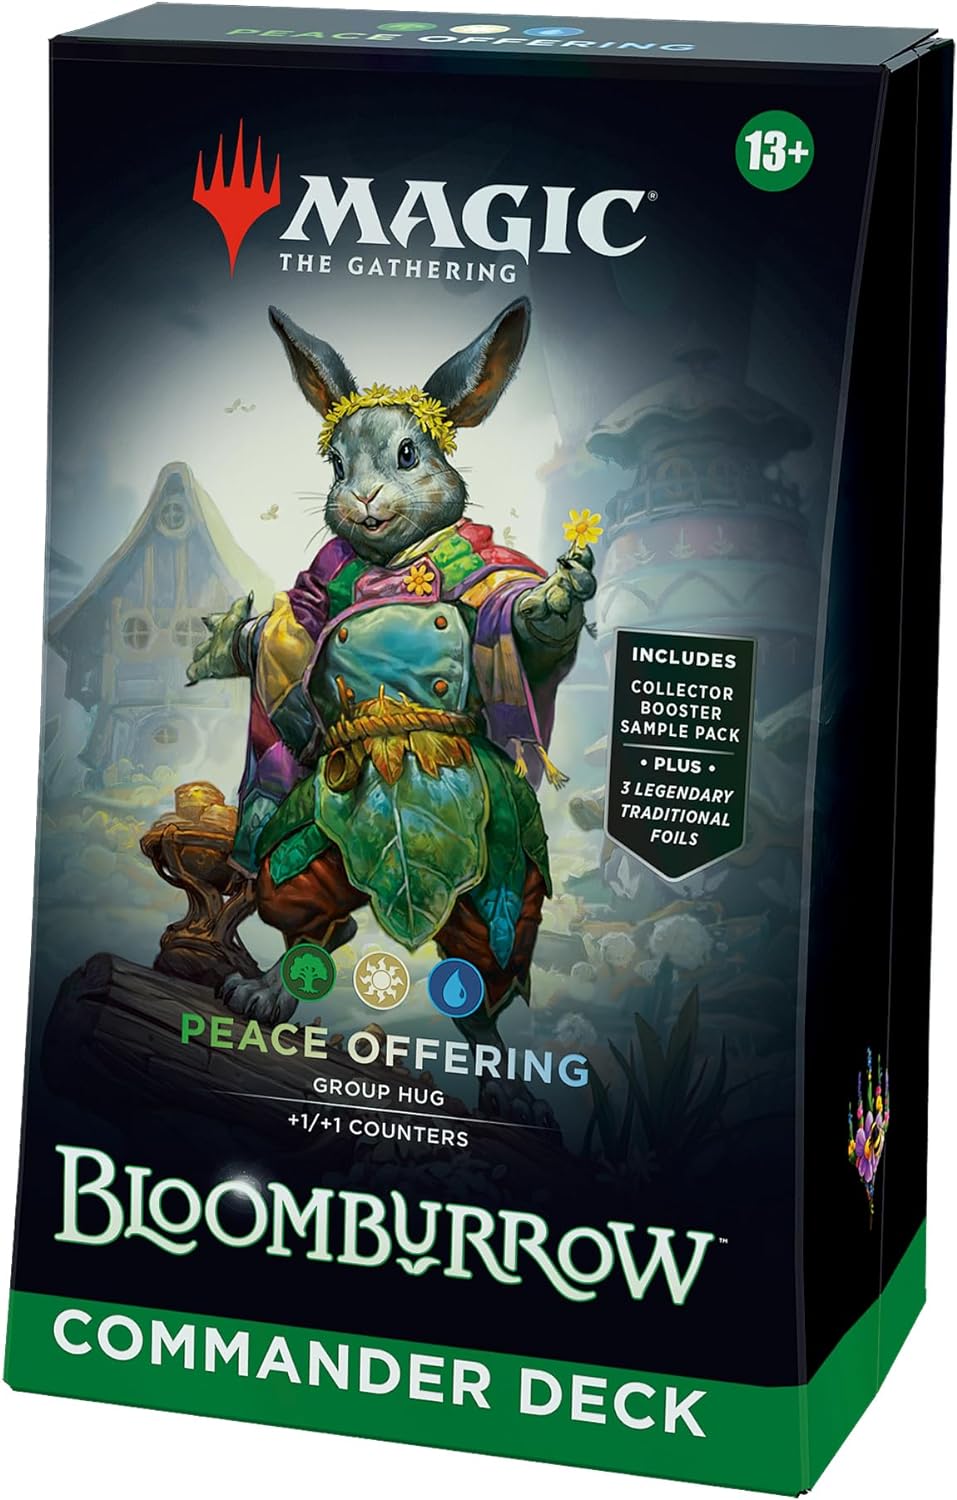 PRE-ORDER: Bloomburrow Commander Deck - Peace Offering (100-Card Deck, 2-Card Collector Booster Sample Pack + Accessories) Magic: The Gathering, Trading Cards made by Magic The Gathering. Exit 23 Games 